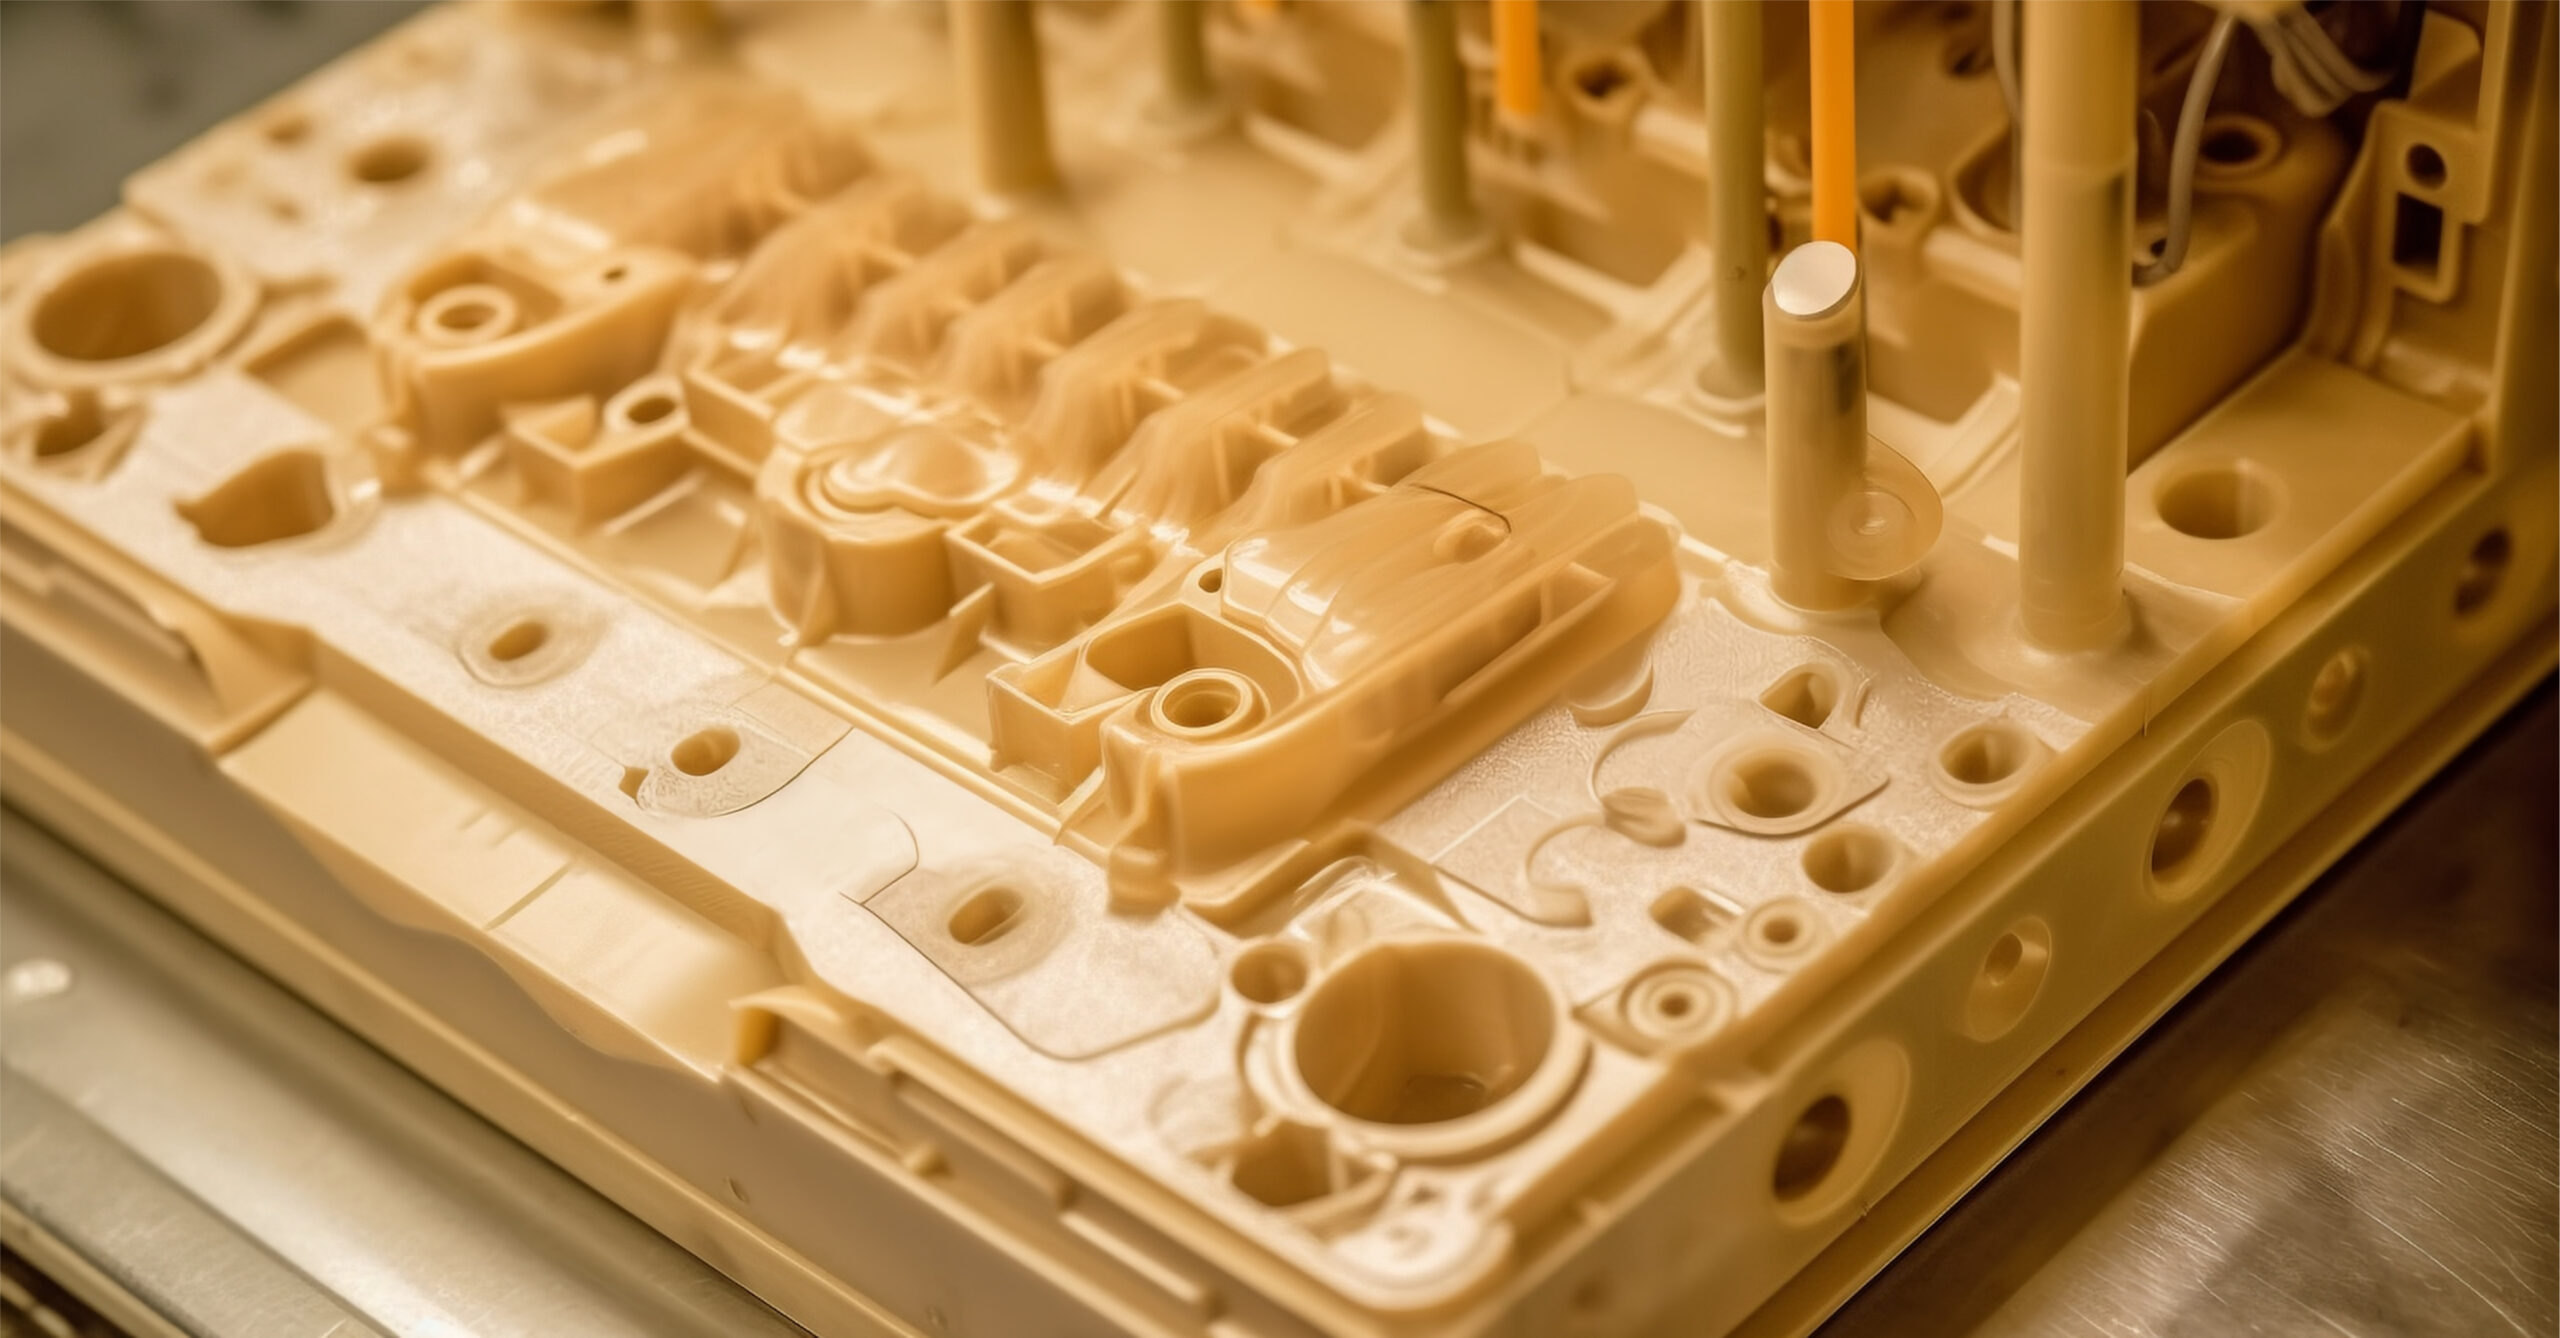 Prototype Injection Molding: High-Quality and Customized Solutions